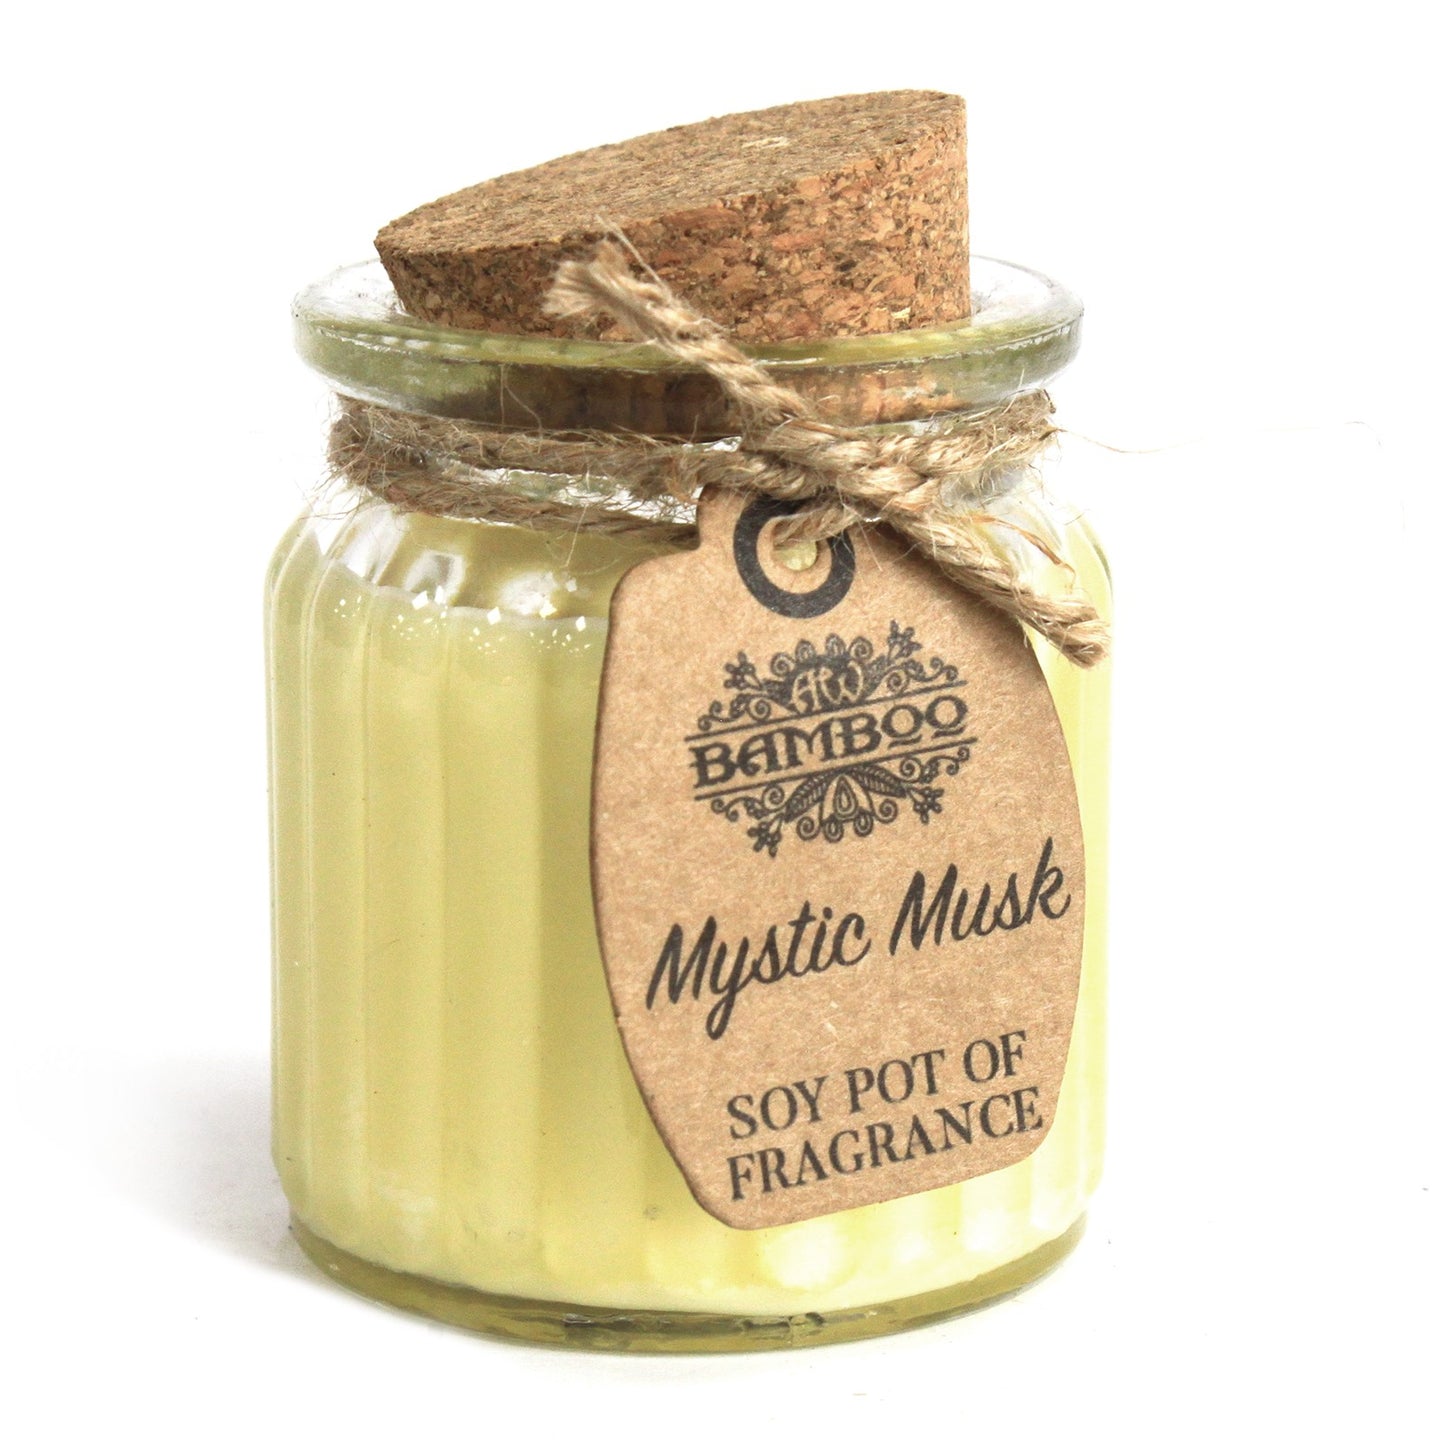 Mystic Musk Soy Pot of Fragrance Candles ( Pack of Two )